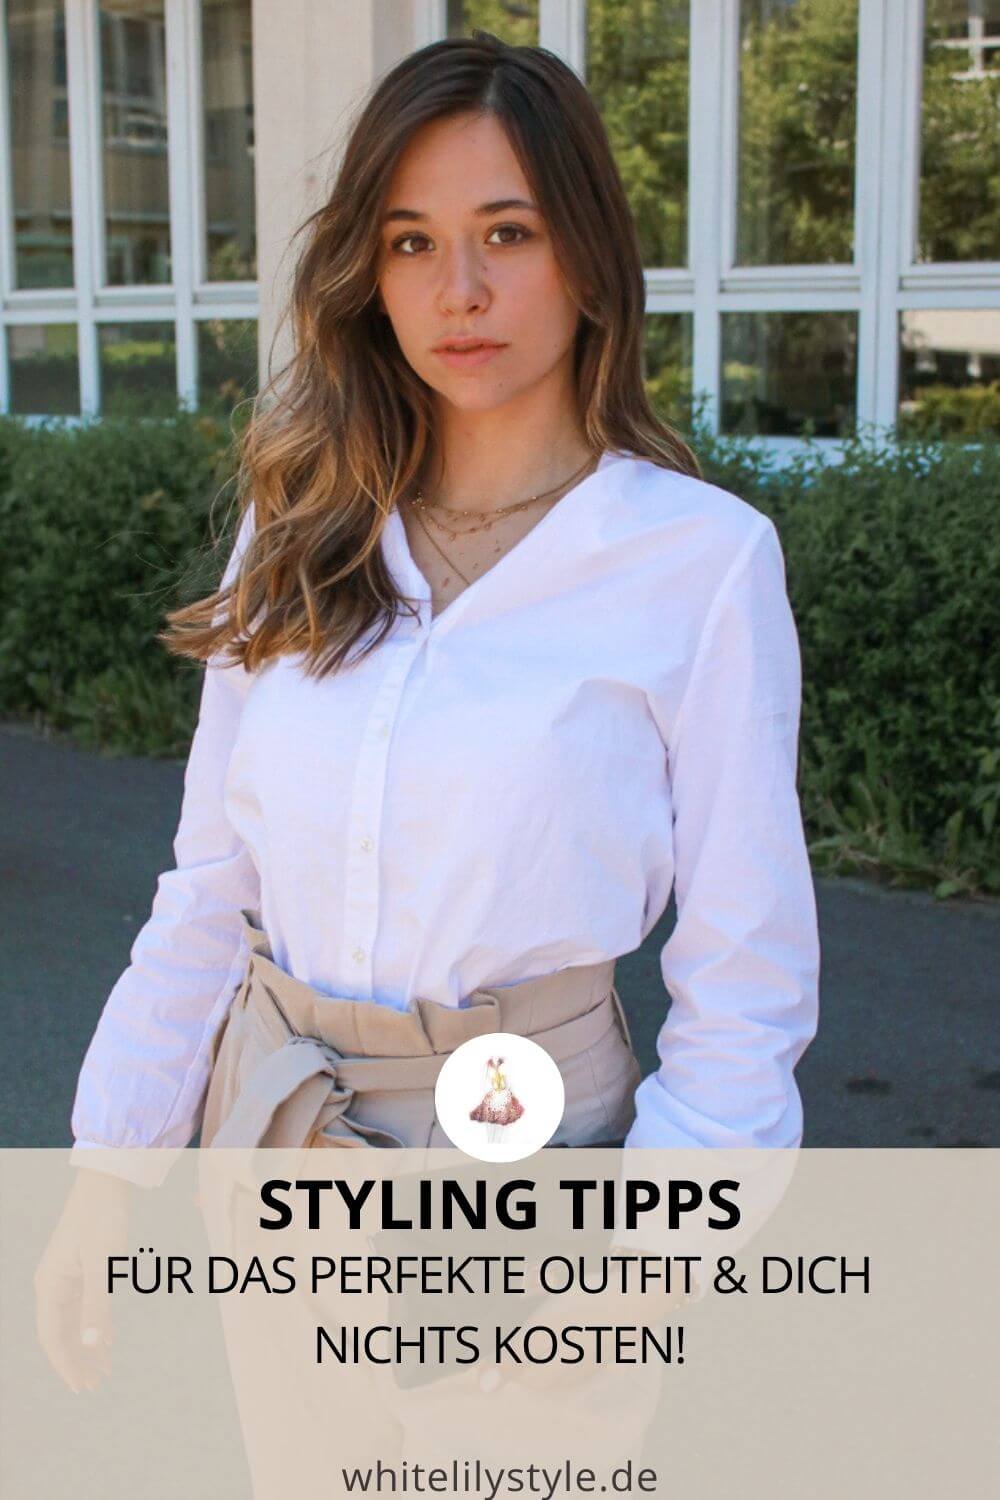 Styling Tipps für jeden Tag – 10 Tipps für das perfekte Outfit